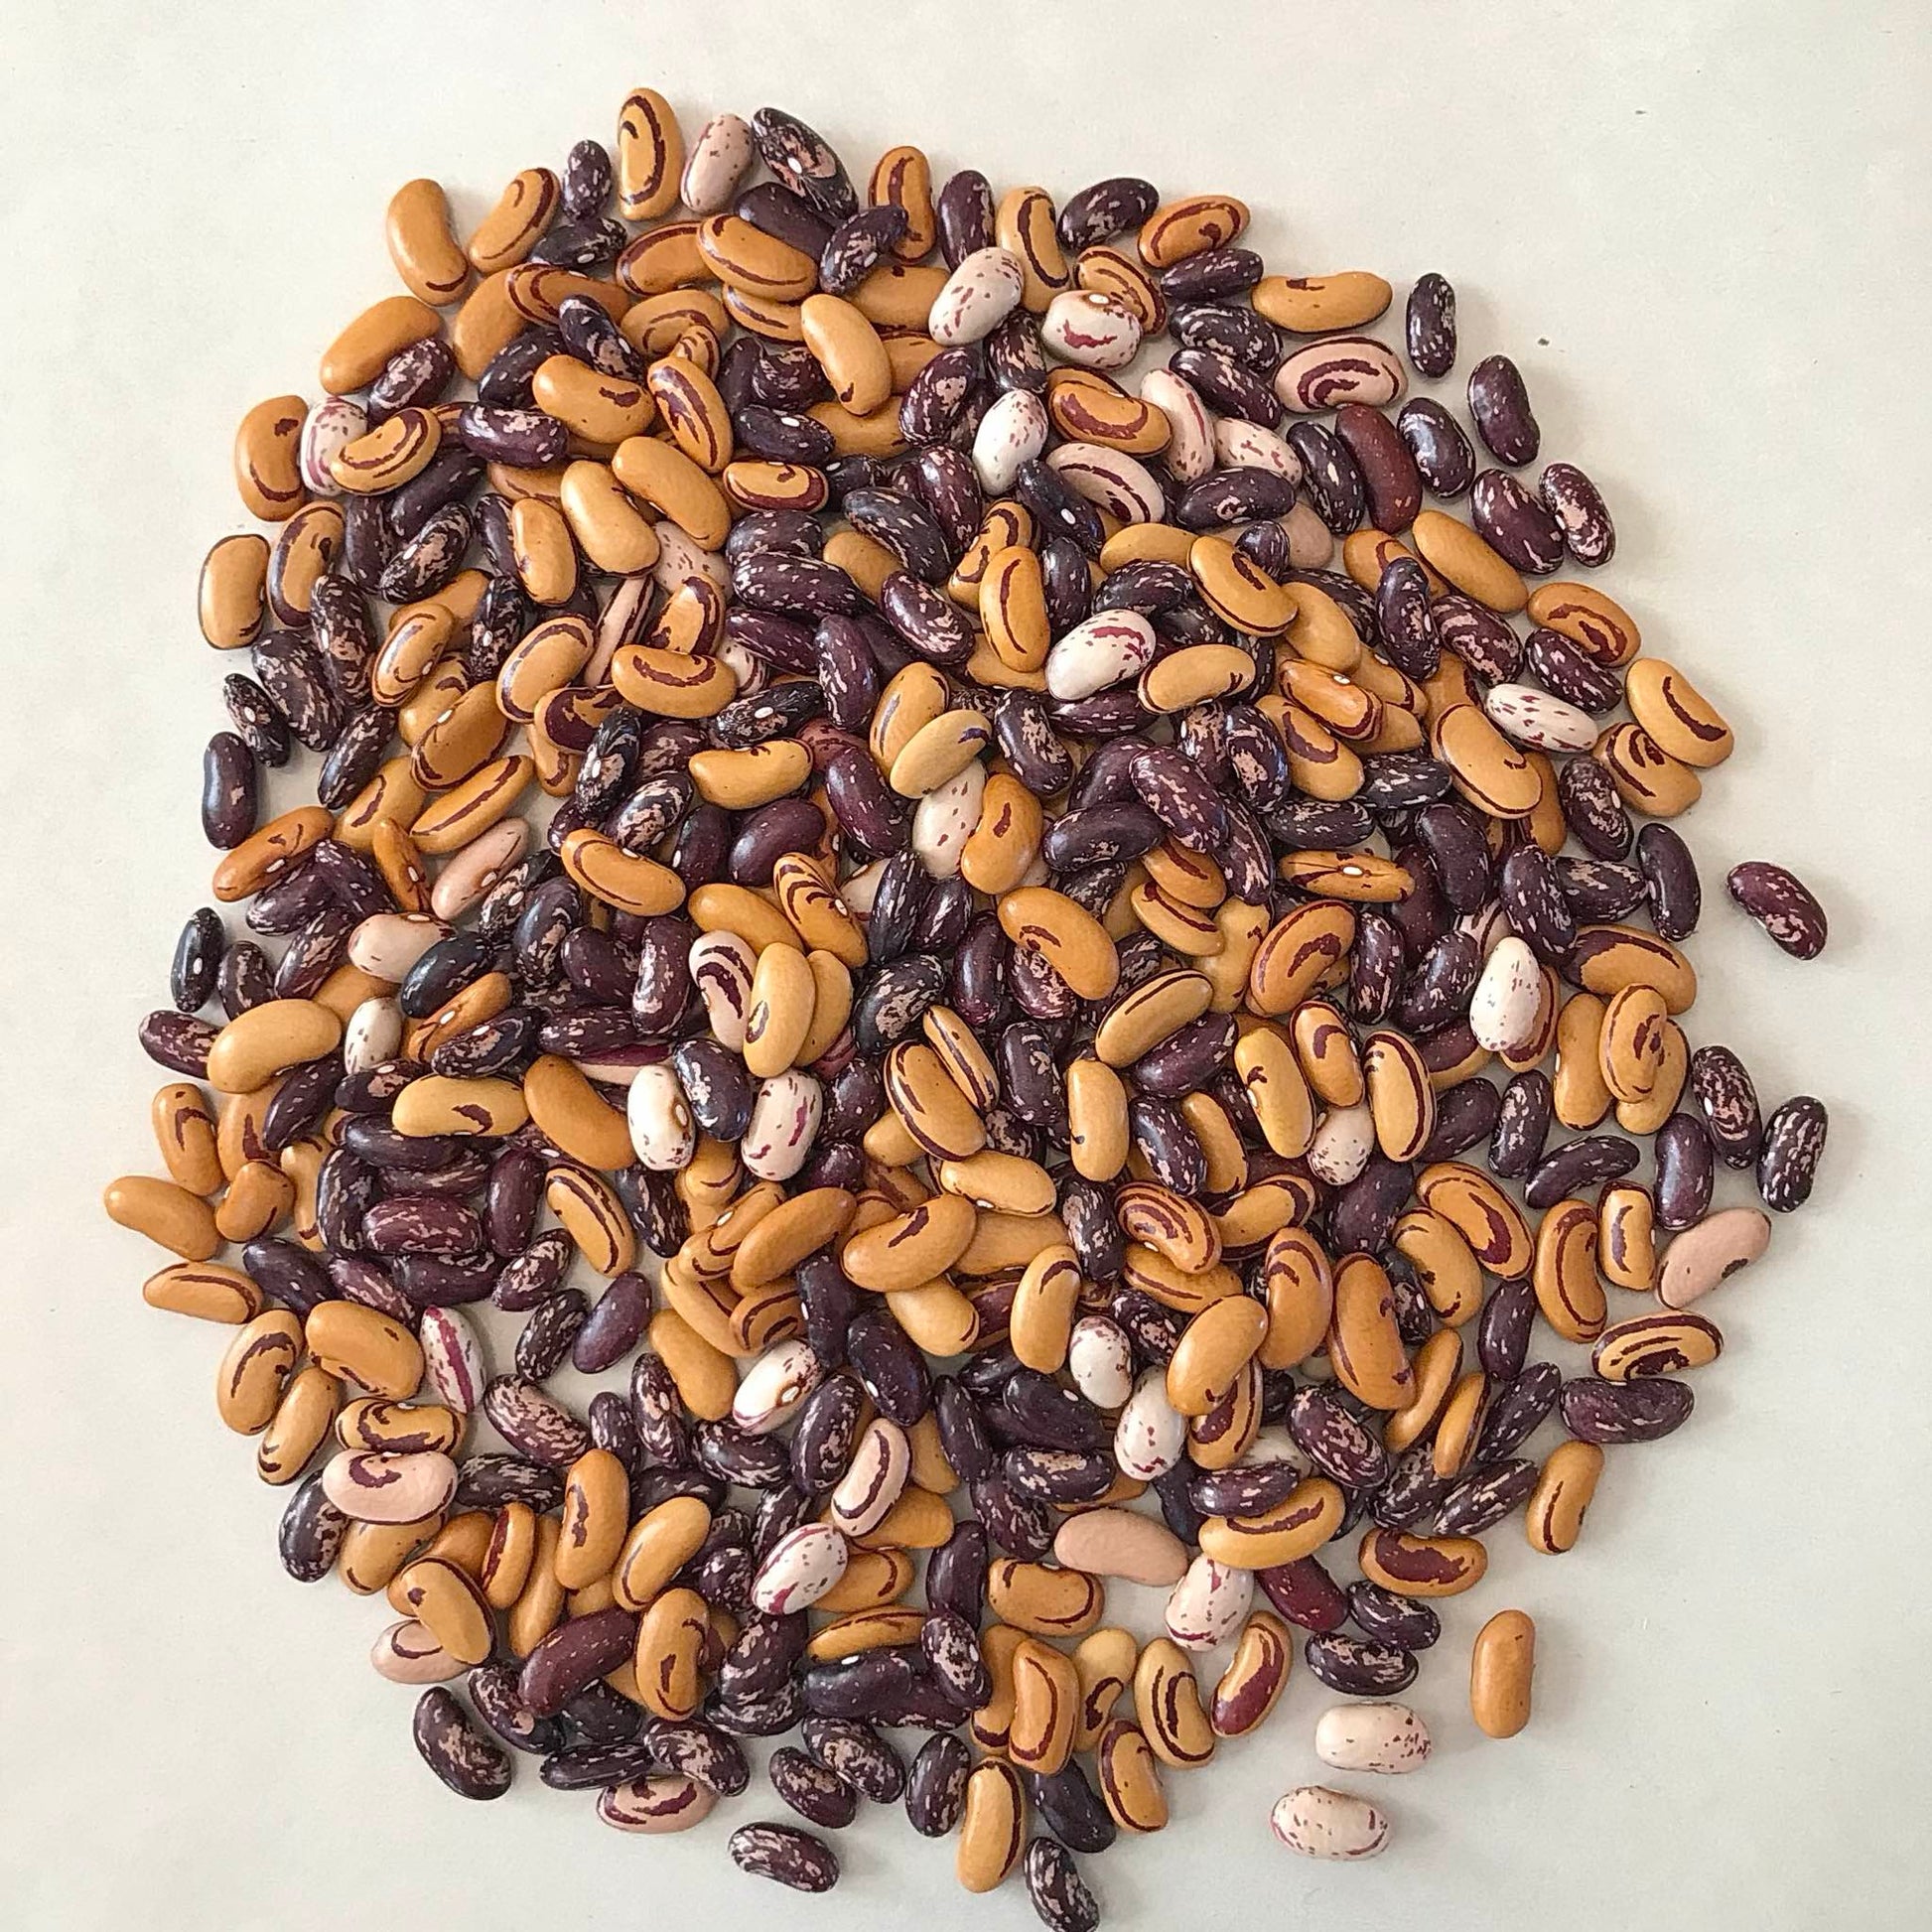 Mix of dried beans with spiral markings in yellow, burgundy, pink, and white.